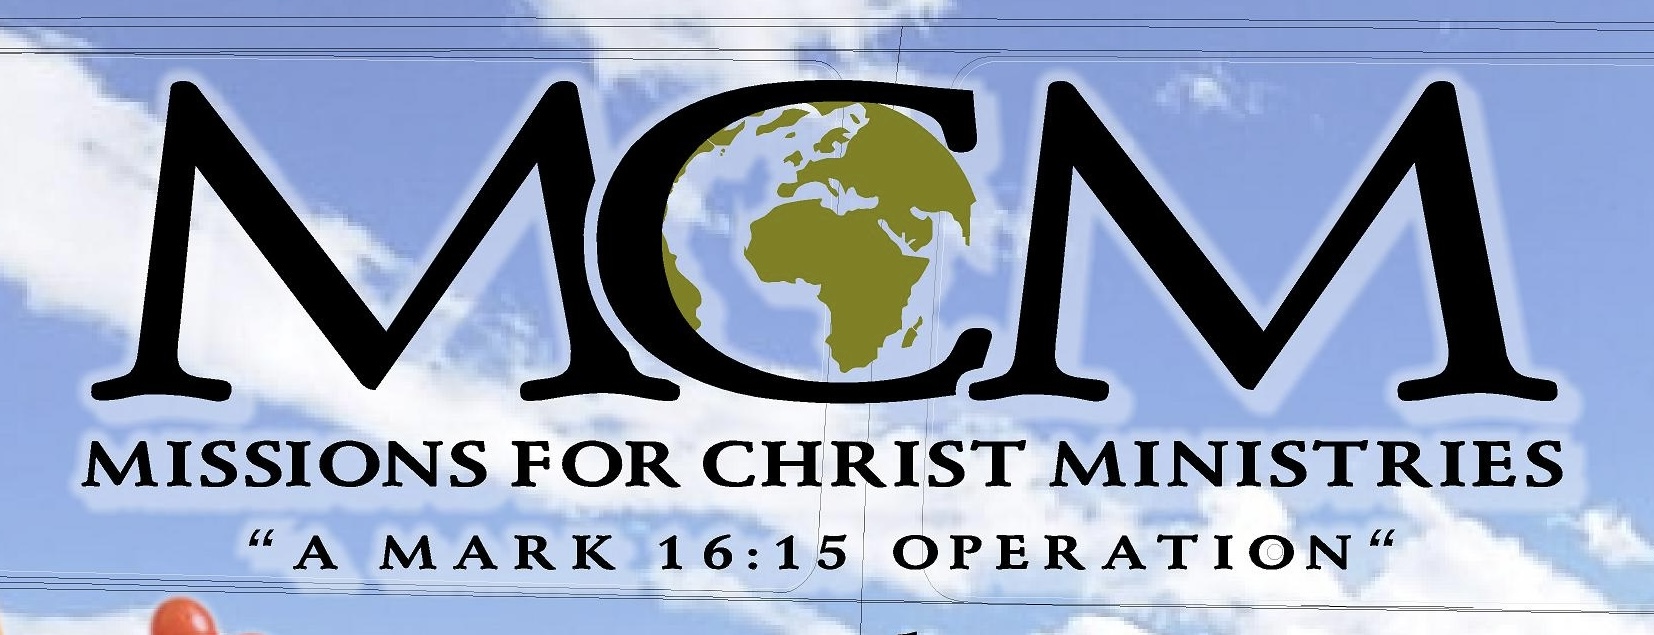 MCM Worship Center | Church Services Live Streaming Tampa FL